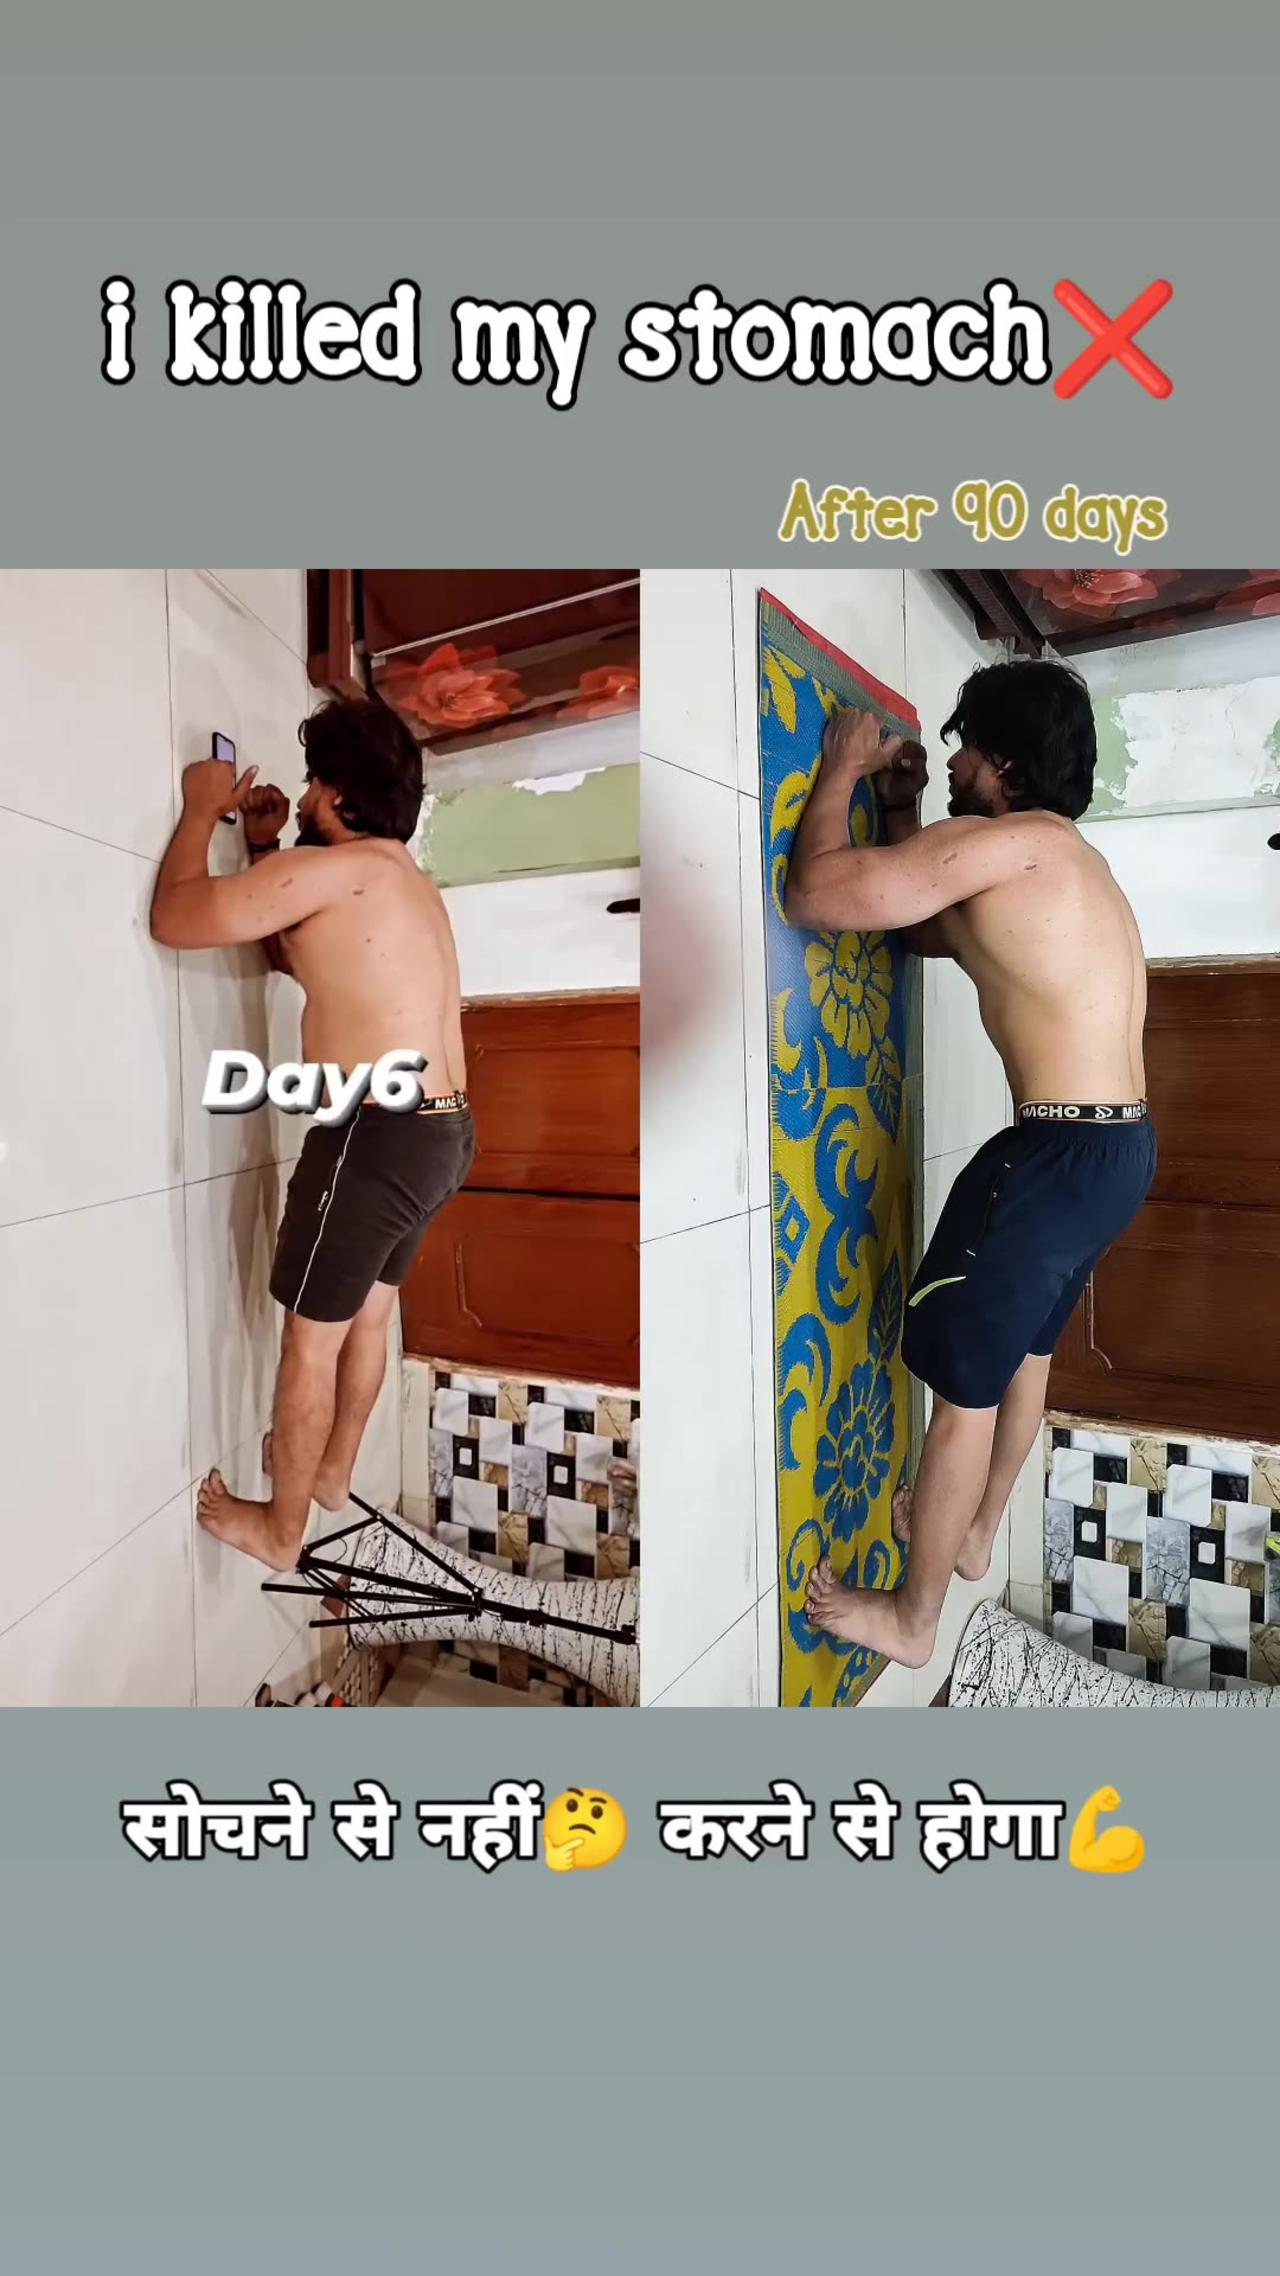 Day 6 V/S day 100 difference